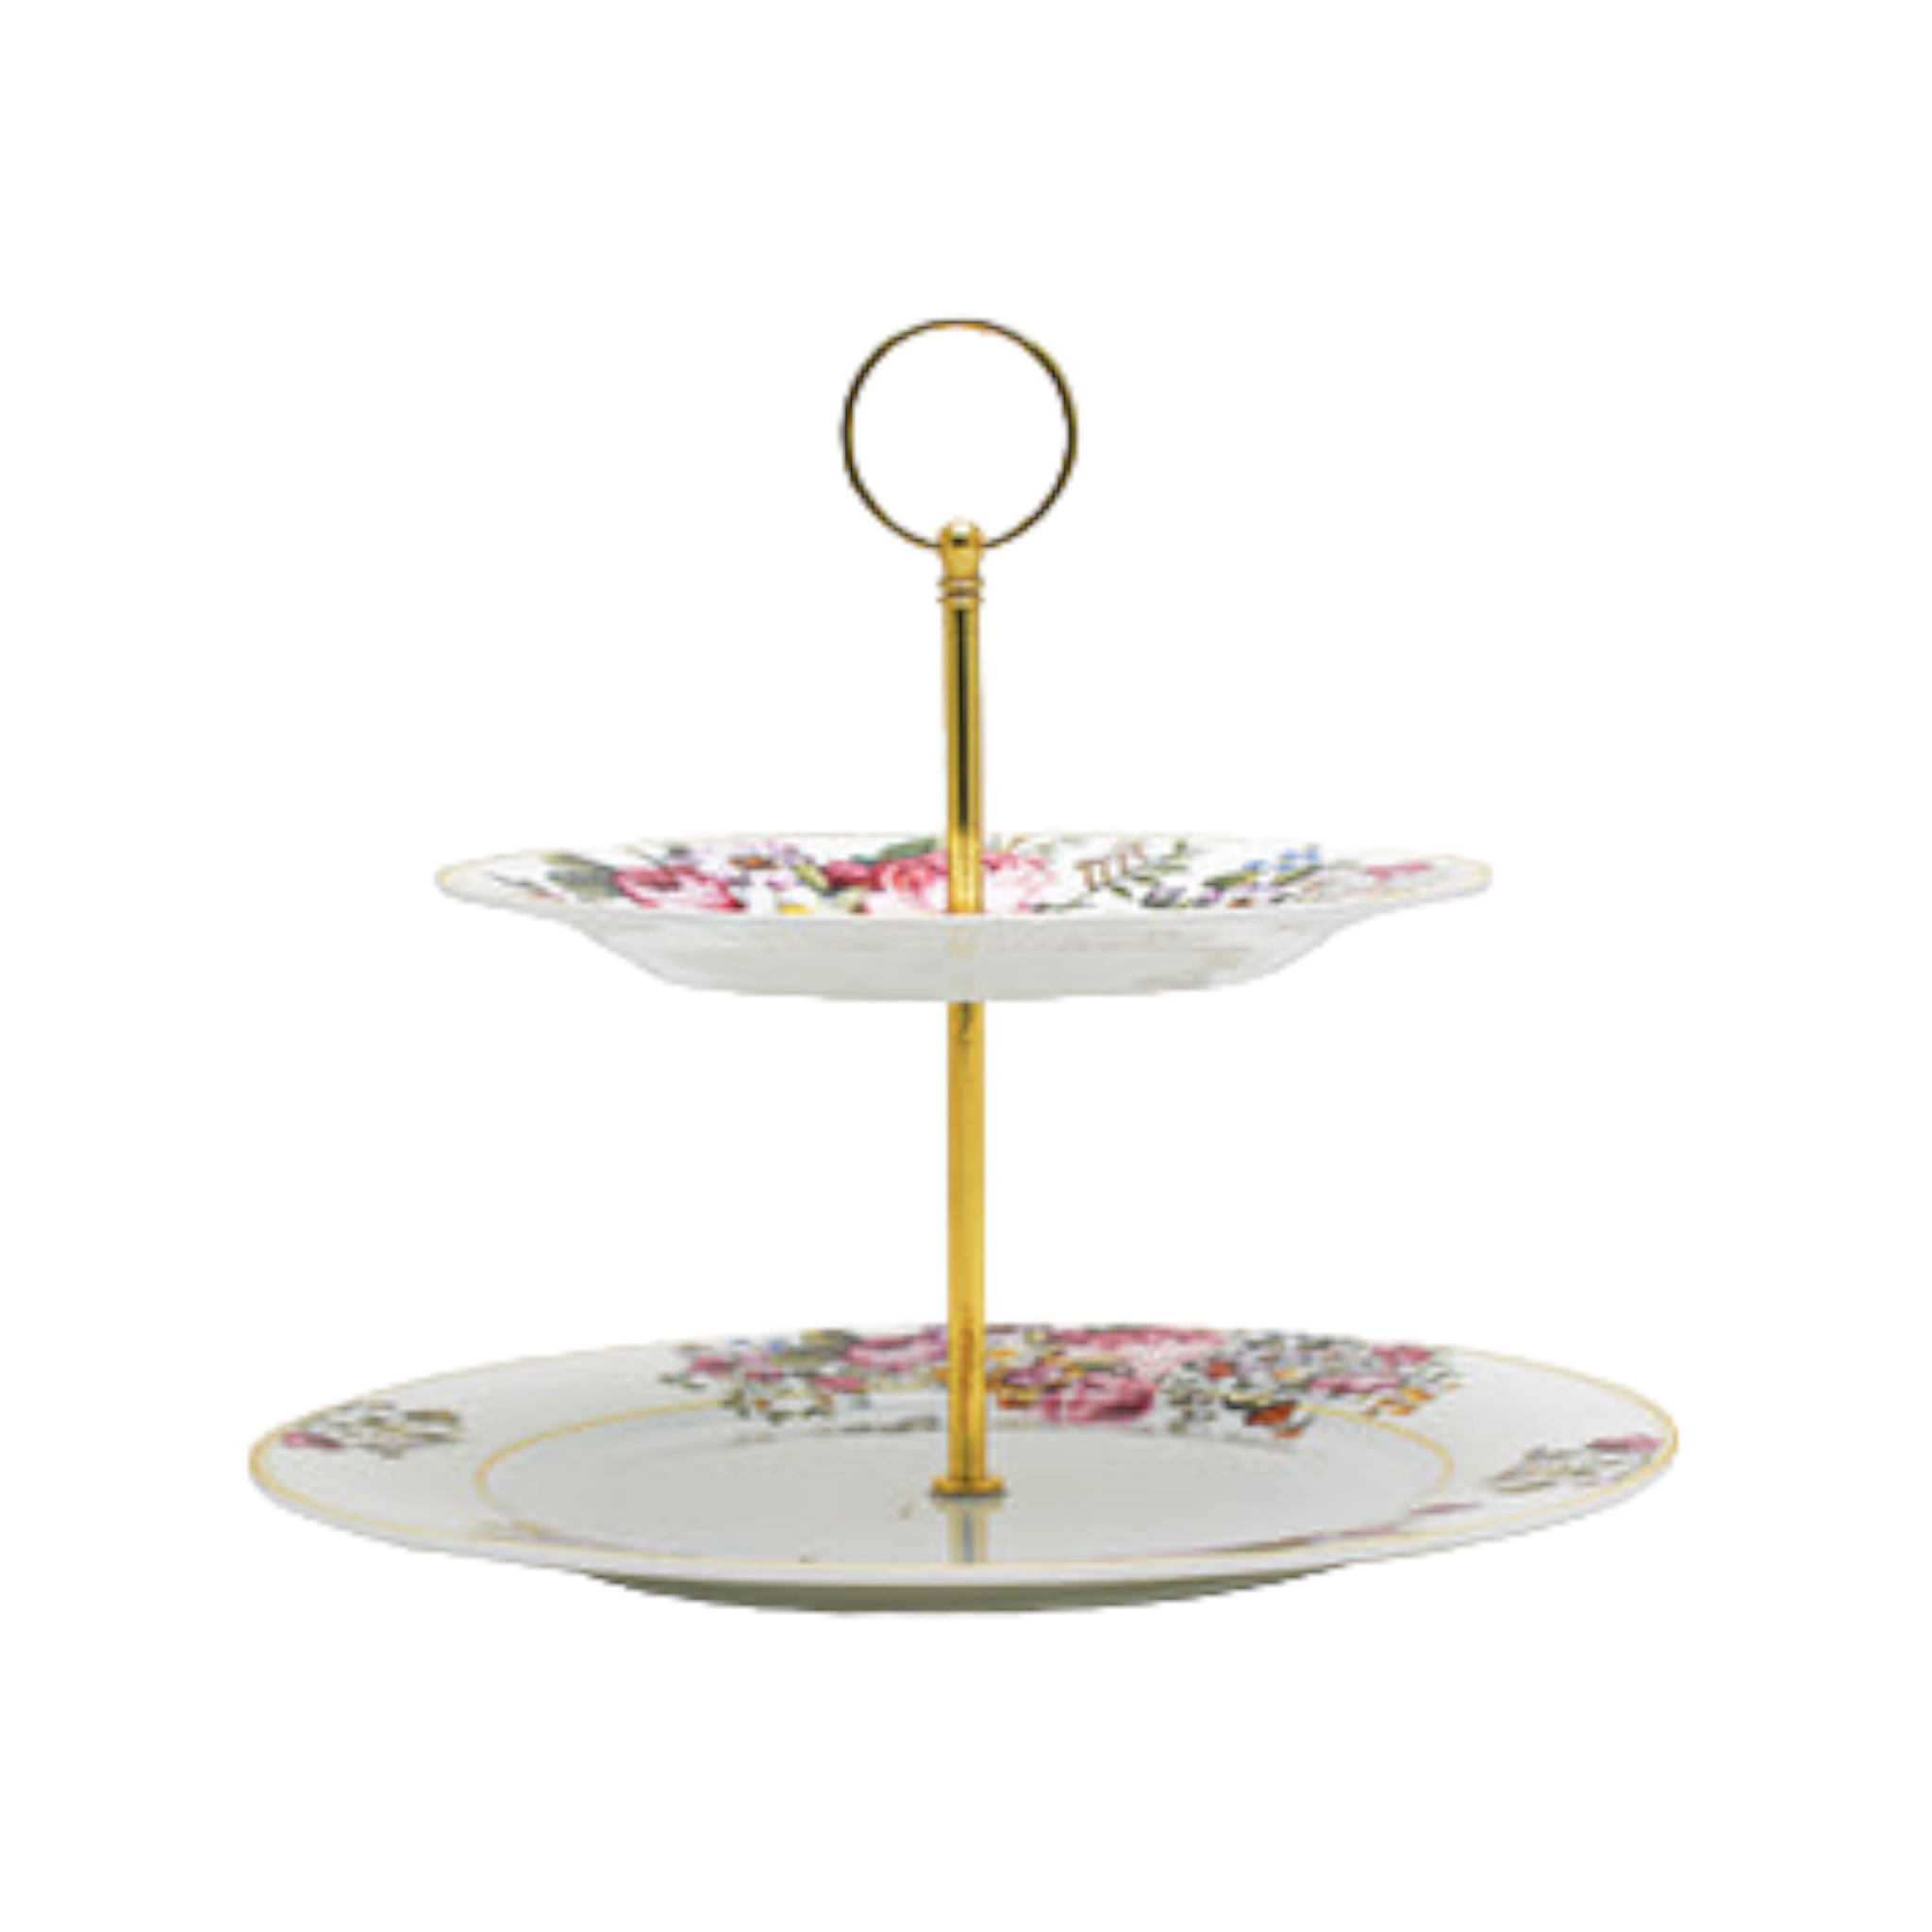 Blooming 2 Tier Serving Platter Patisserie Cake Server Stand English Rose Print 130479